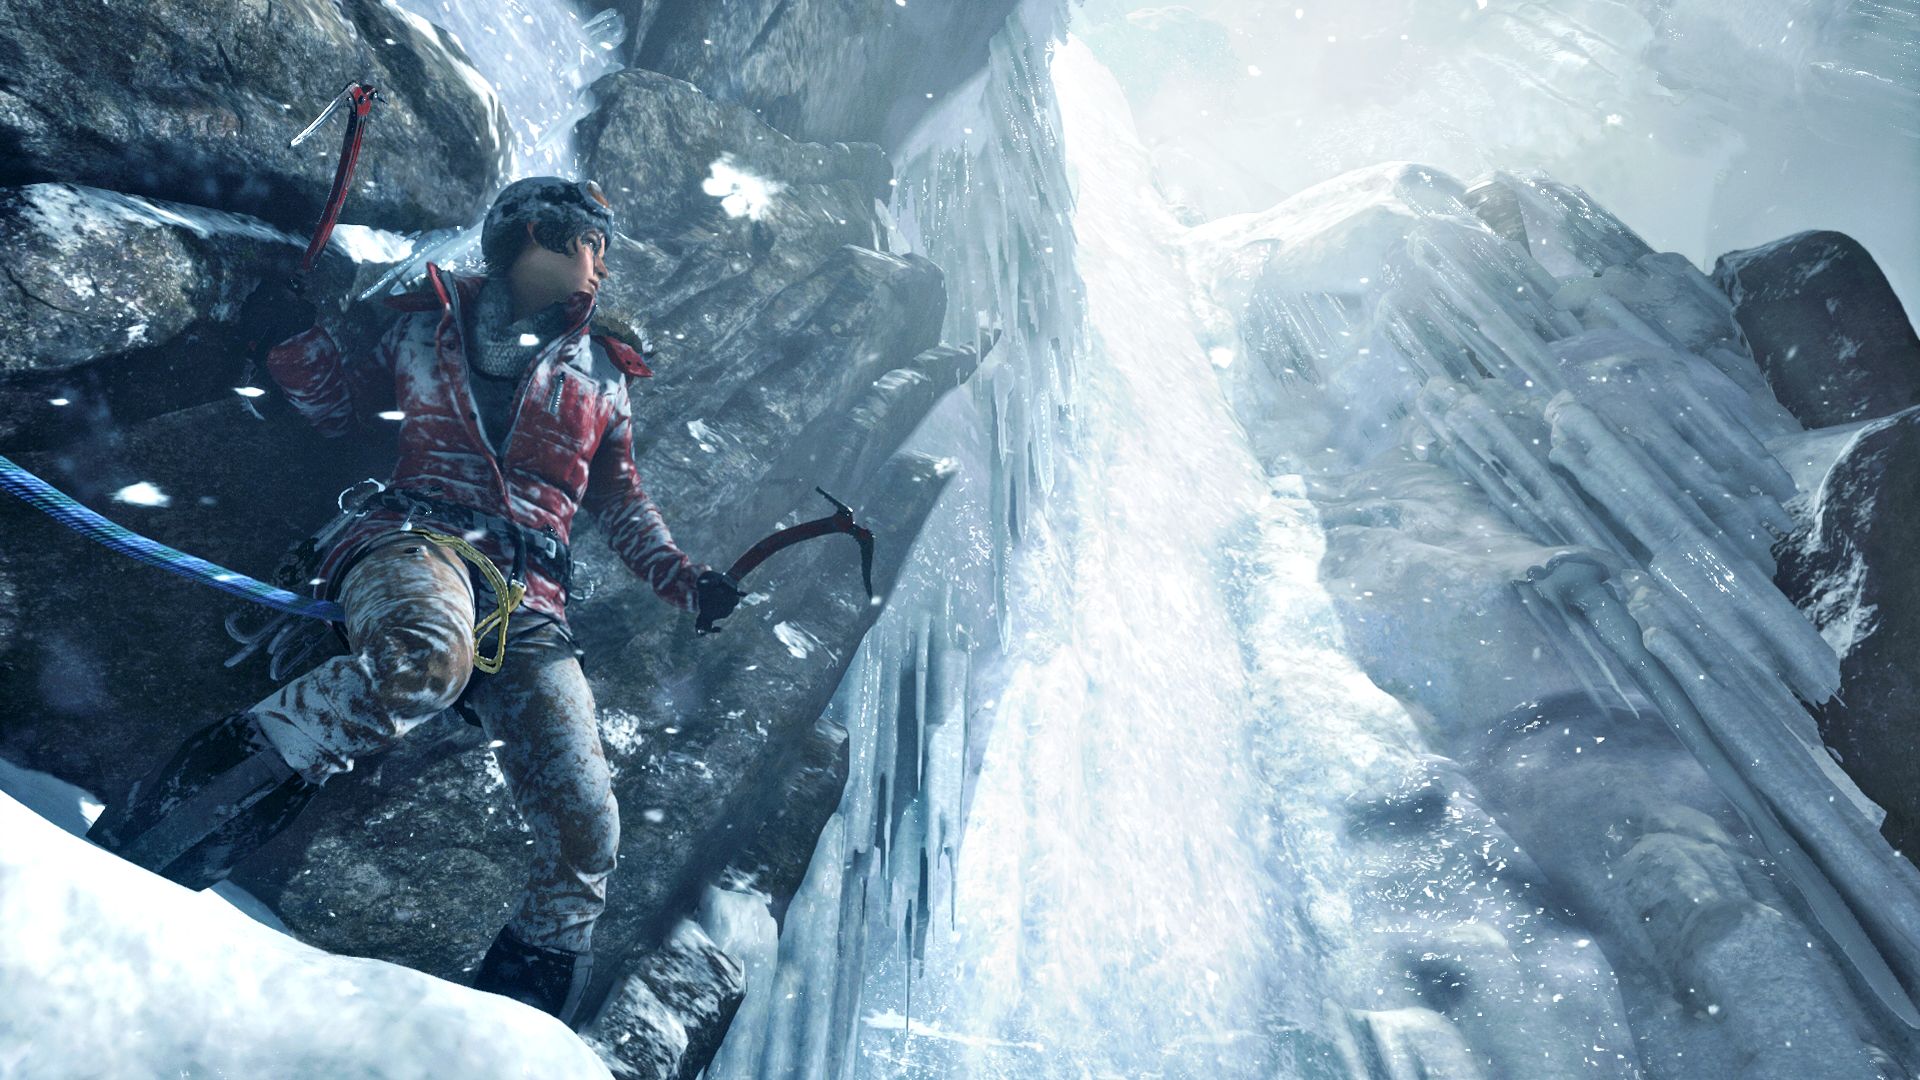 Rise Of The Tomb Raider Backgrounds, Compatible - PC, Mobile, Gadgets| 1920x1080 px